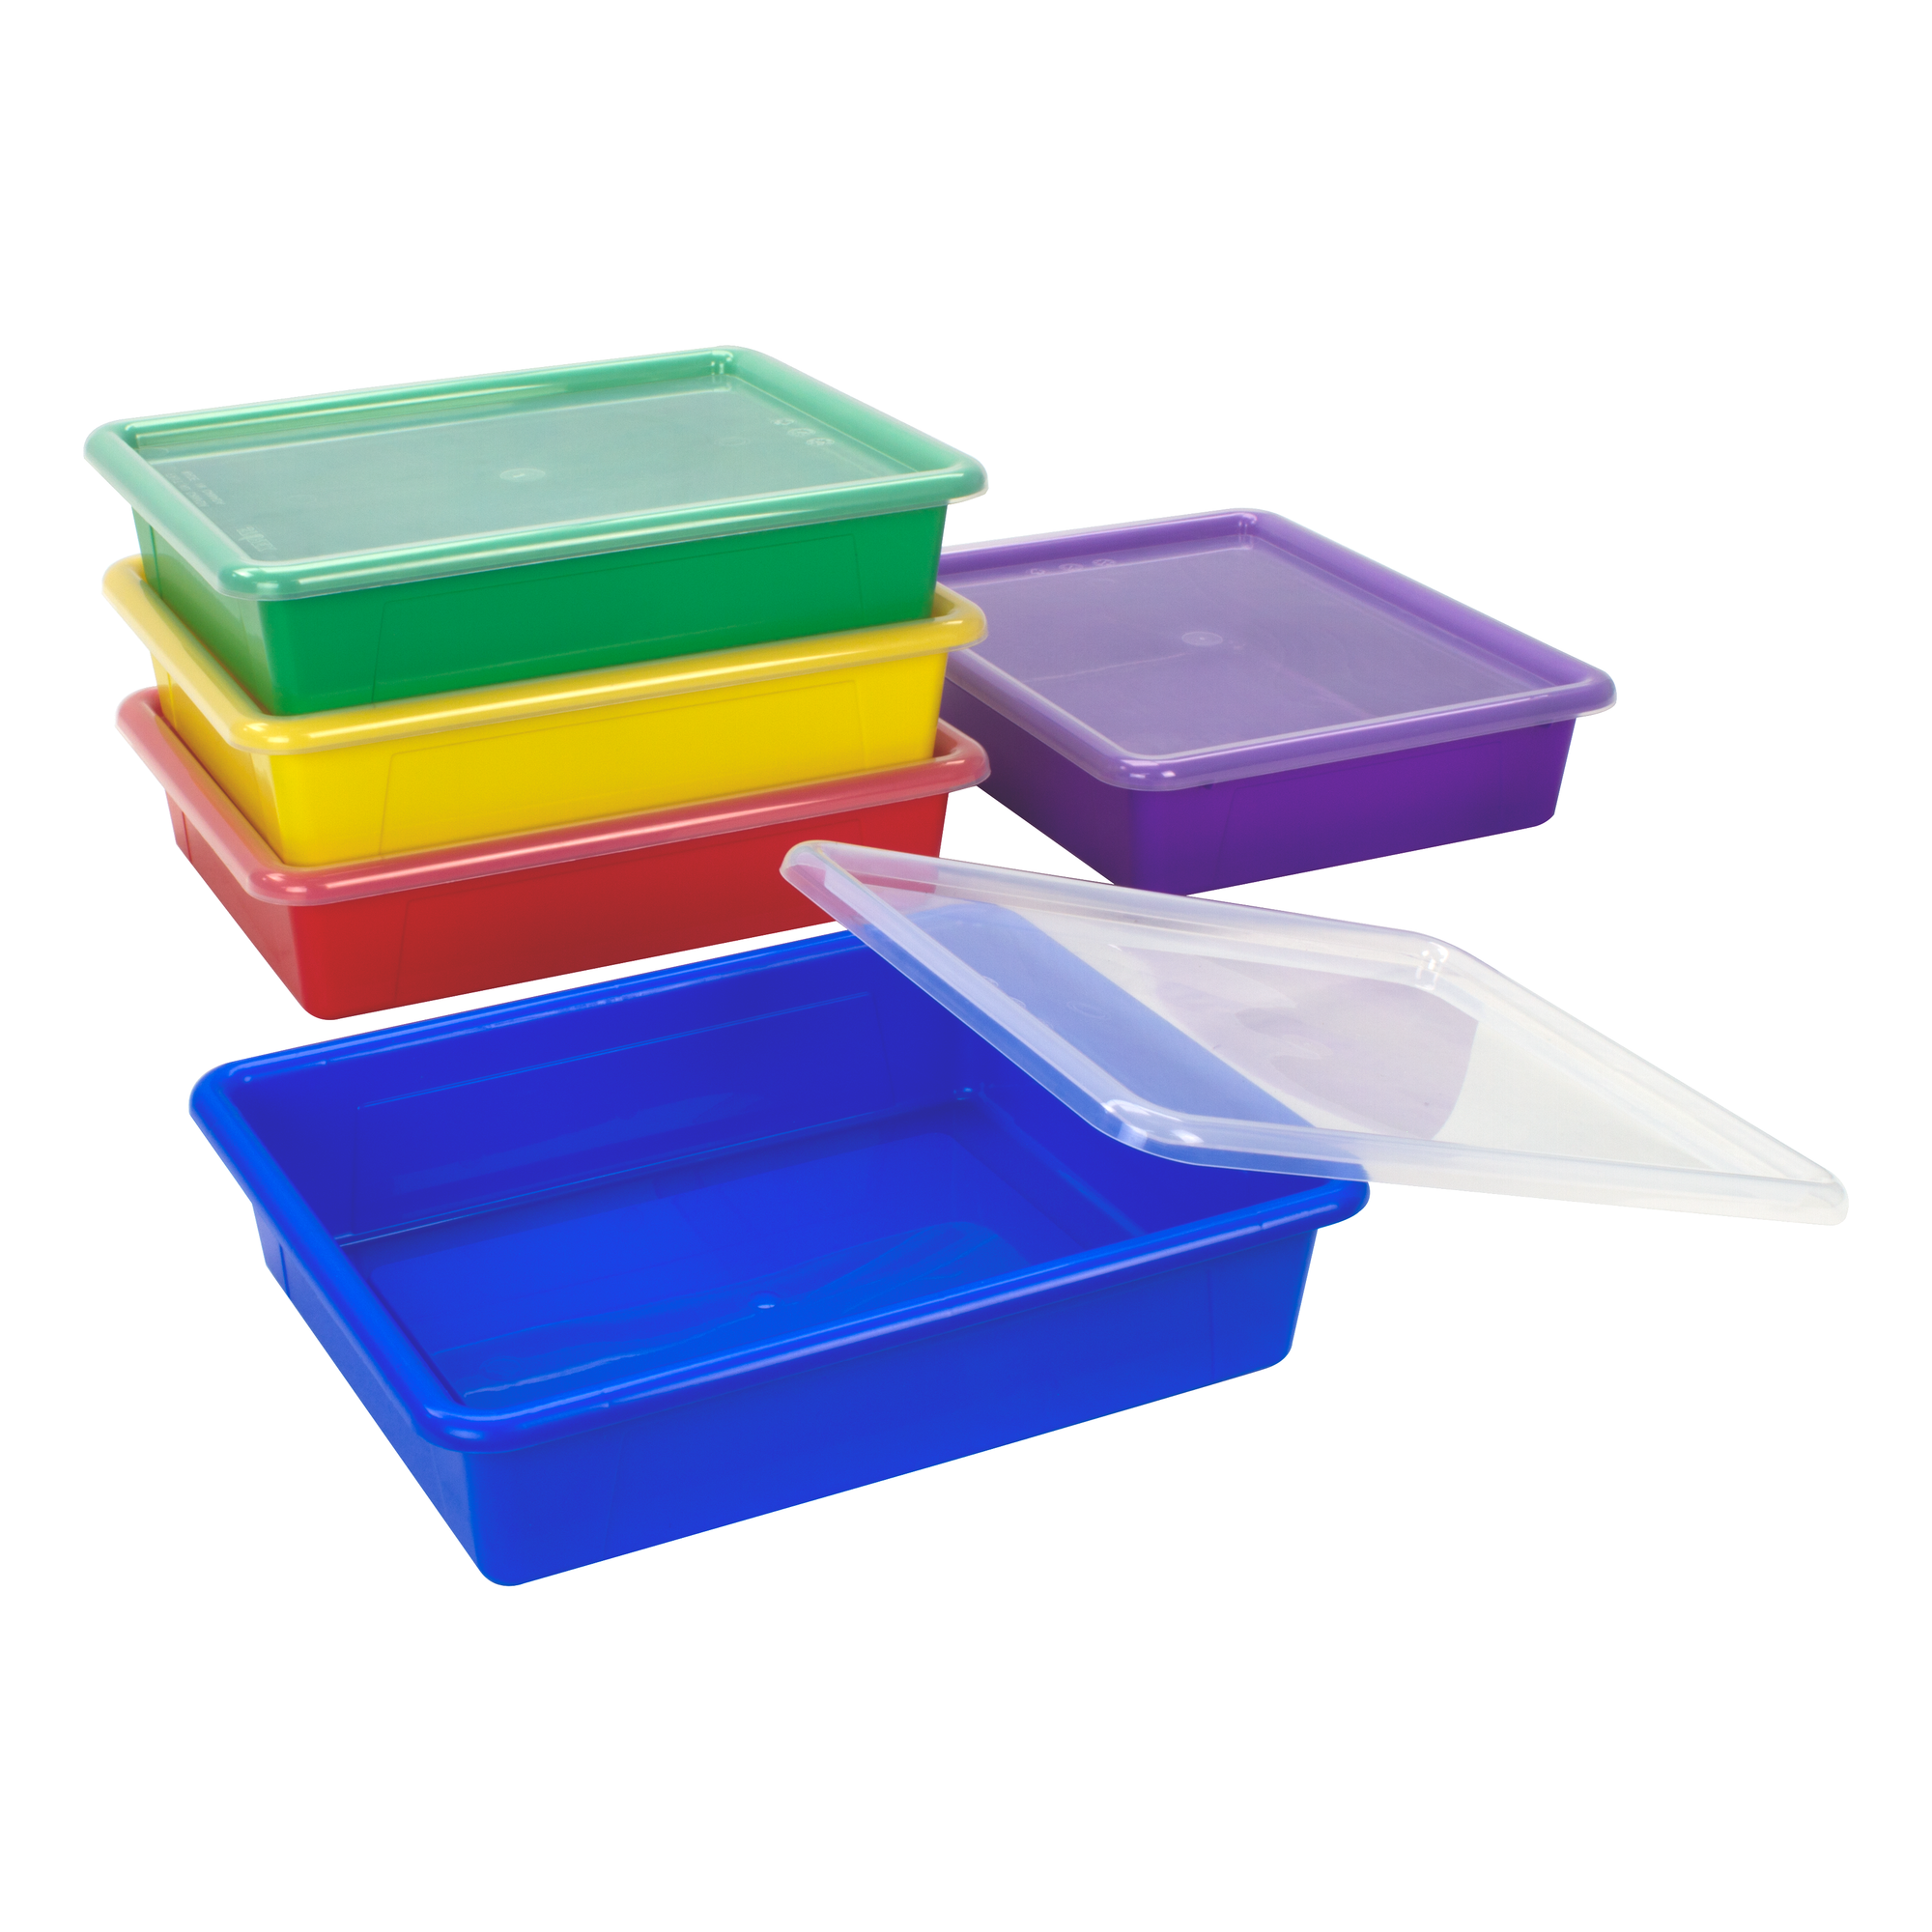 Storex Flat Storage Tray with Lid, Letter Size, 10 x 13 x 3 Inches, Assorted Colors, 5-Pack